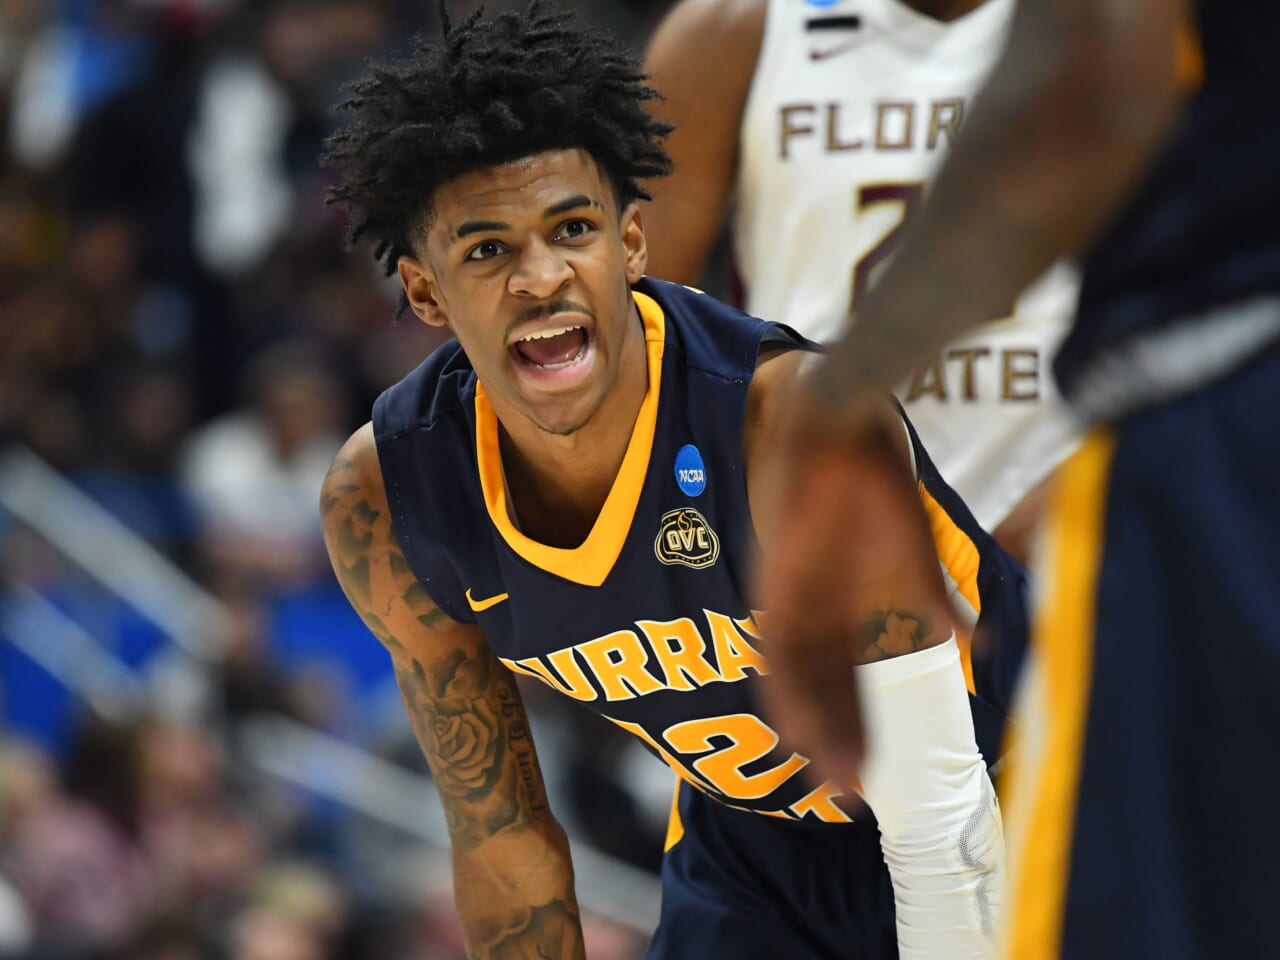 Could the New York Knicks draft Ja Morant if they miss out on Zion Williamson?